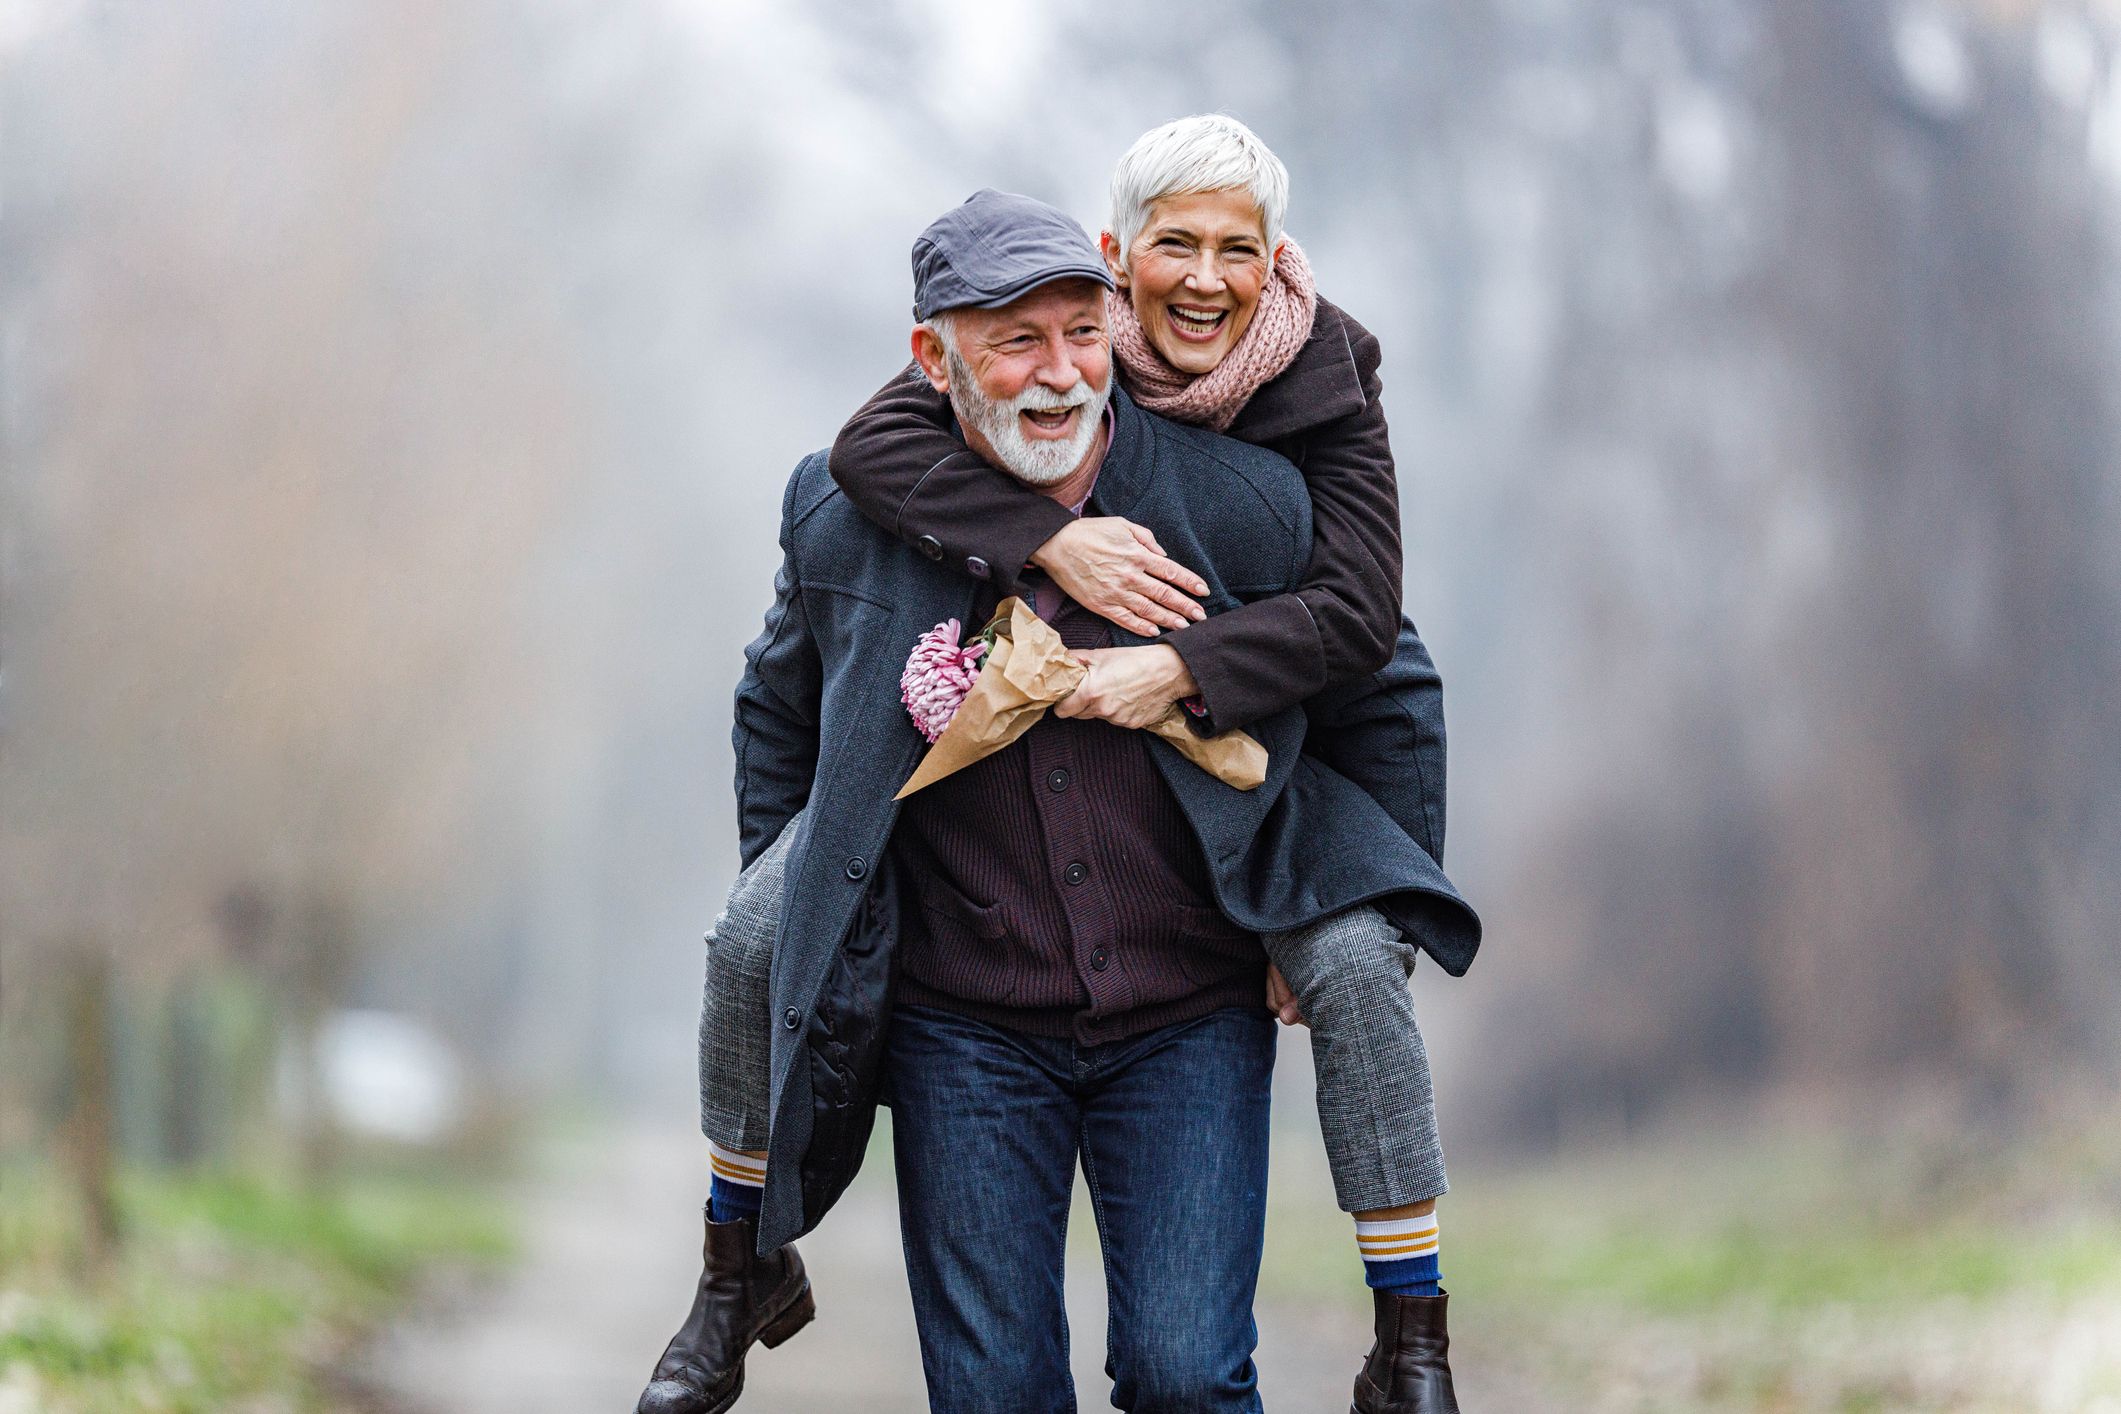 10 Best Dating Sites for People Over 50 to Find Love pic image